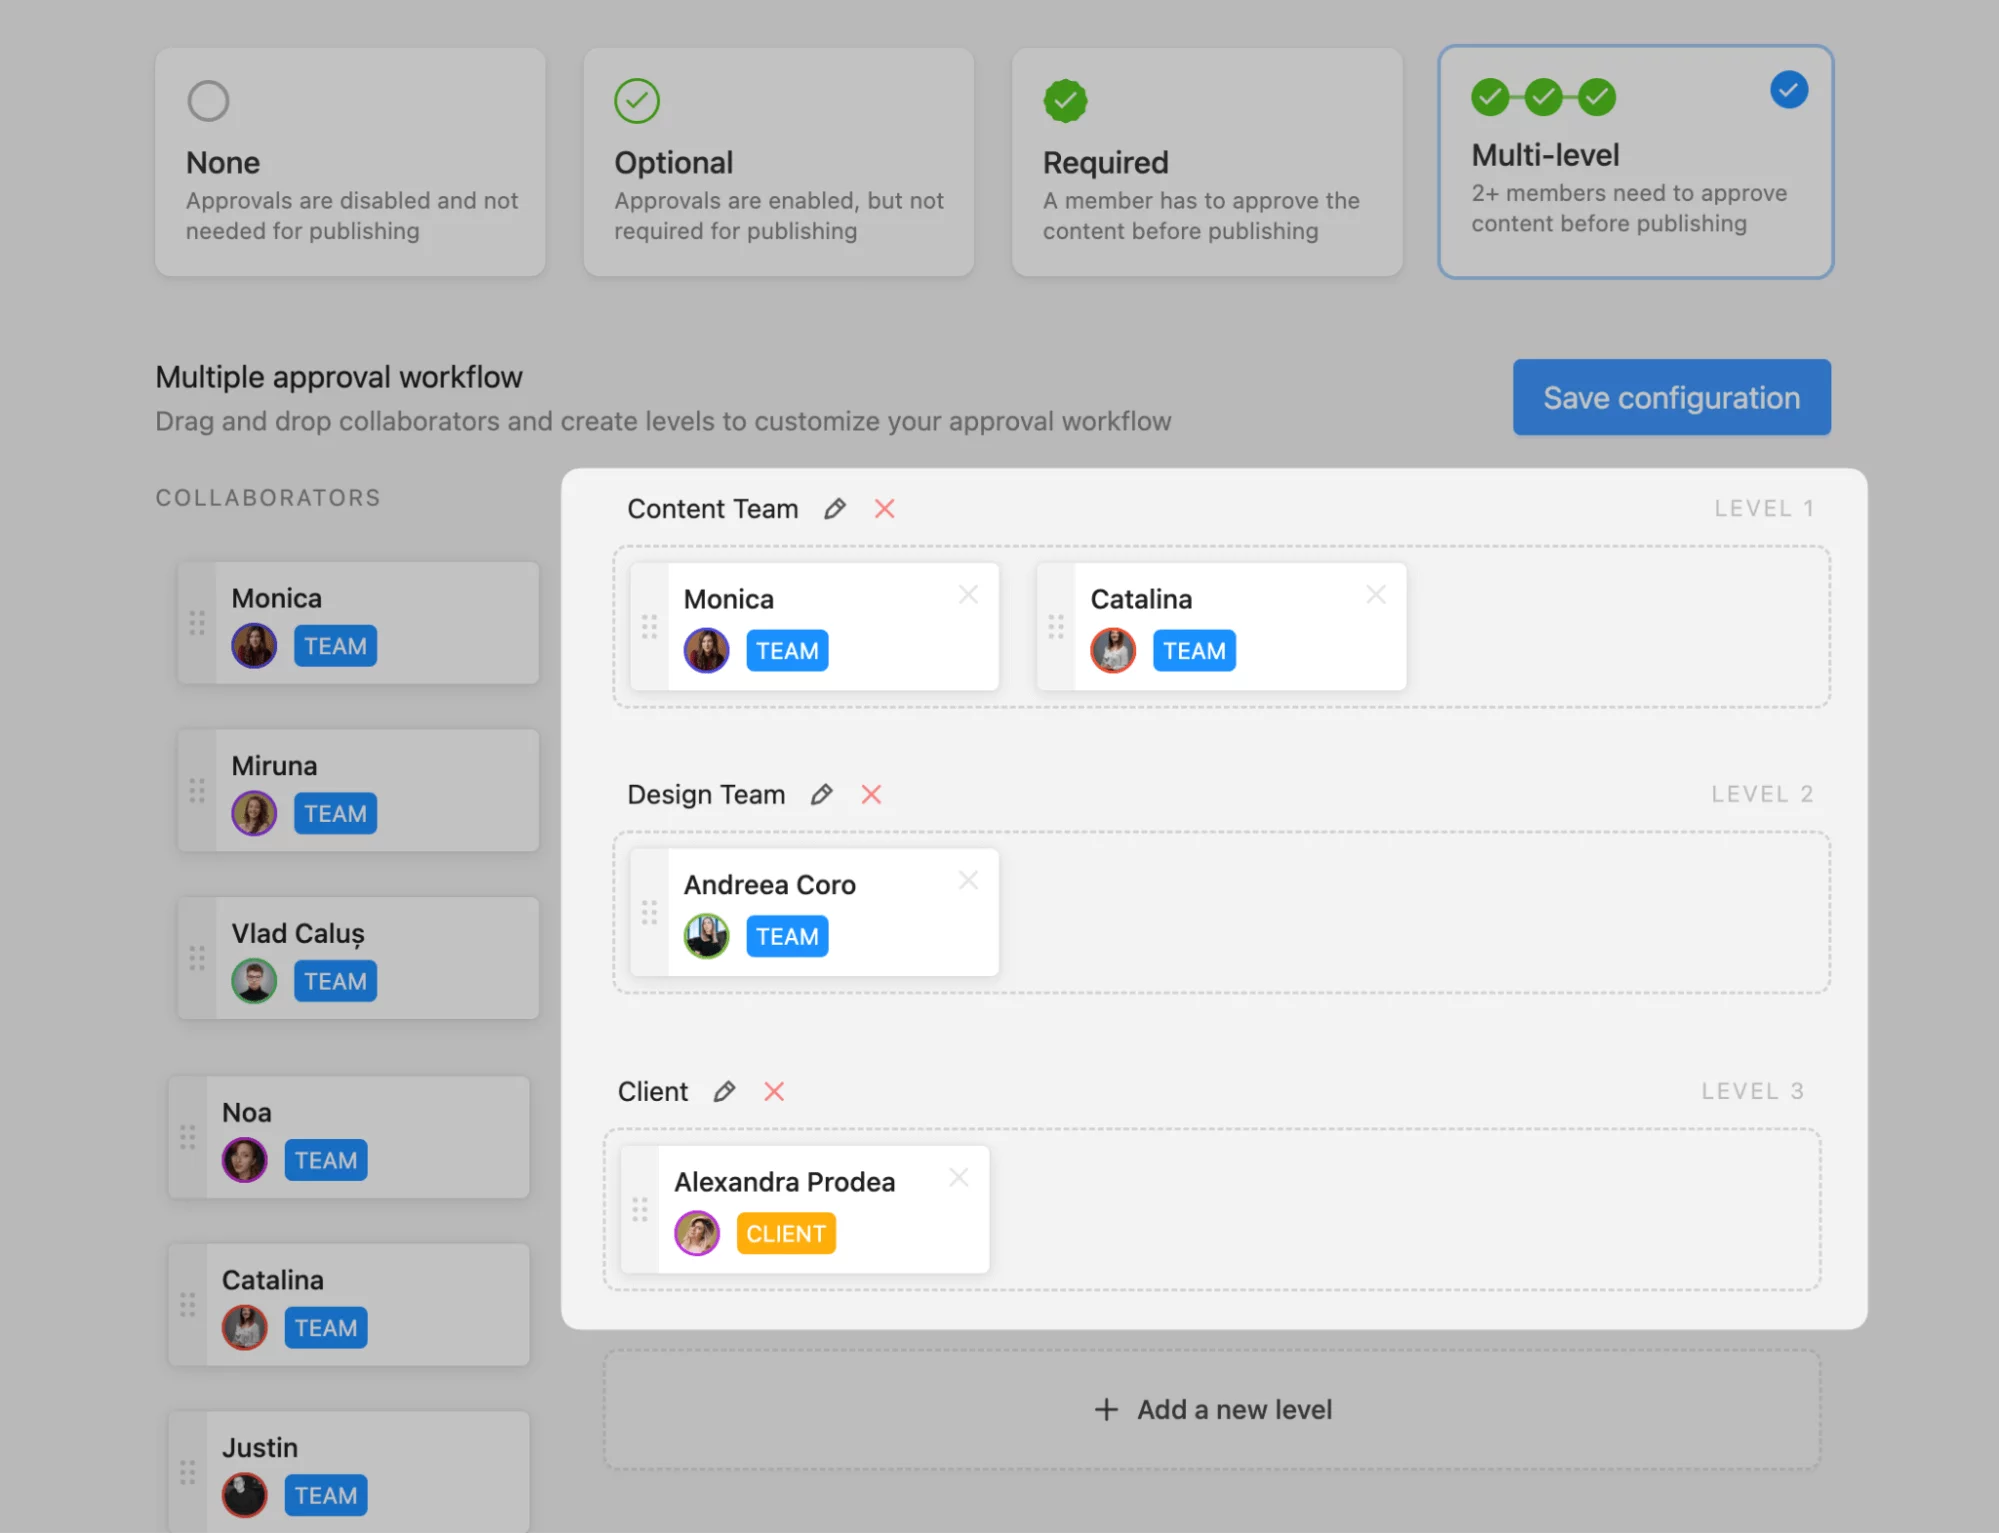 Screenshot showing multi-level approval layers for Content Team, Design Team and Client.